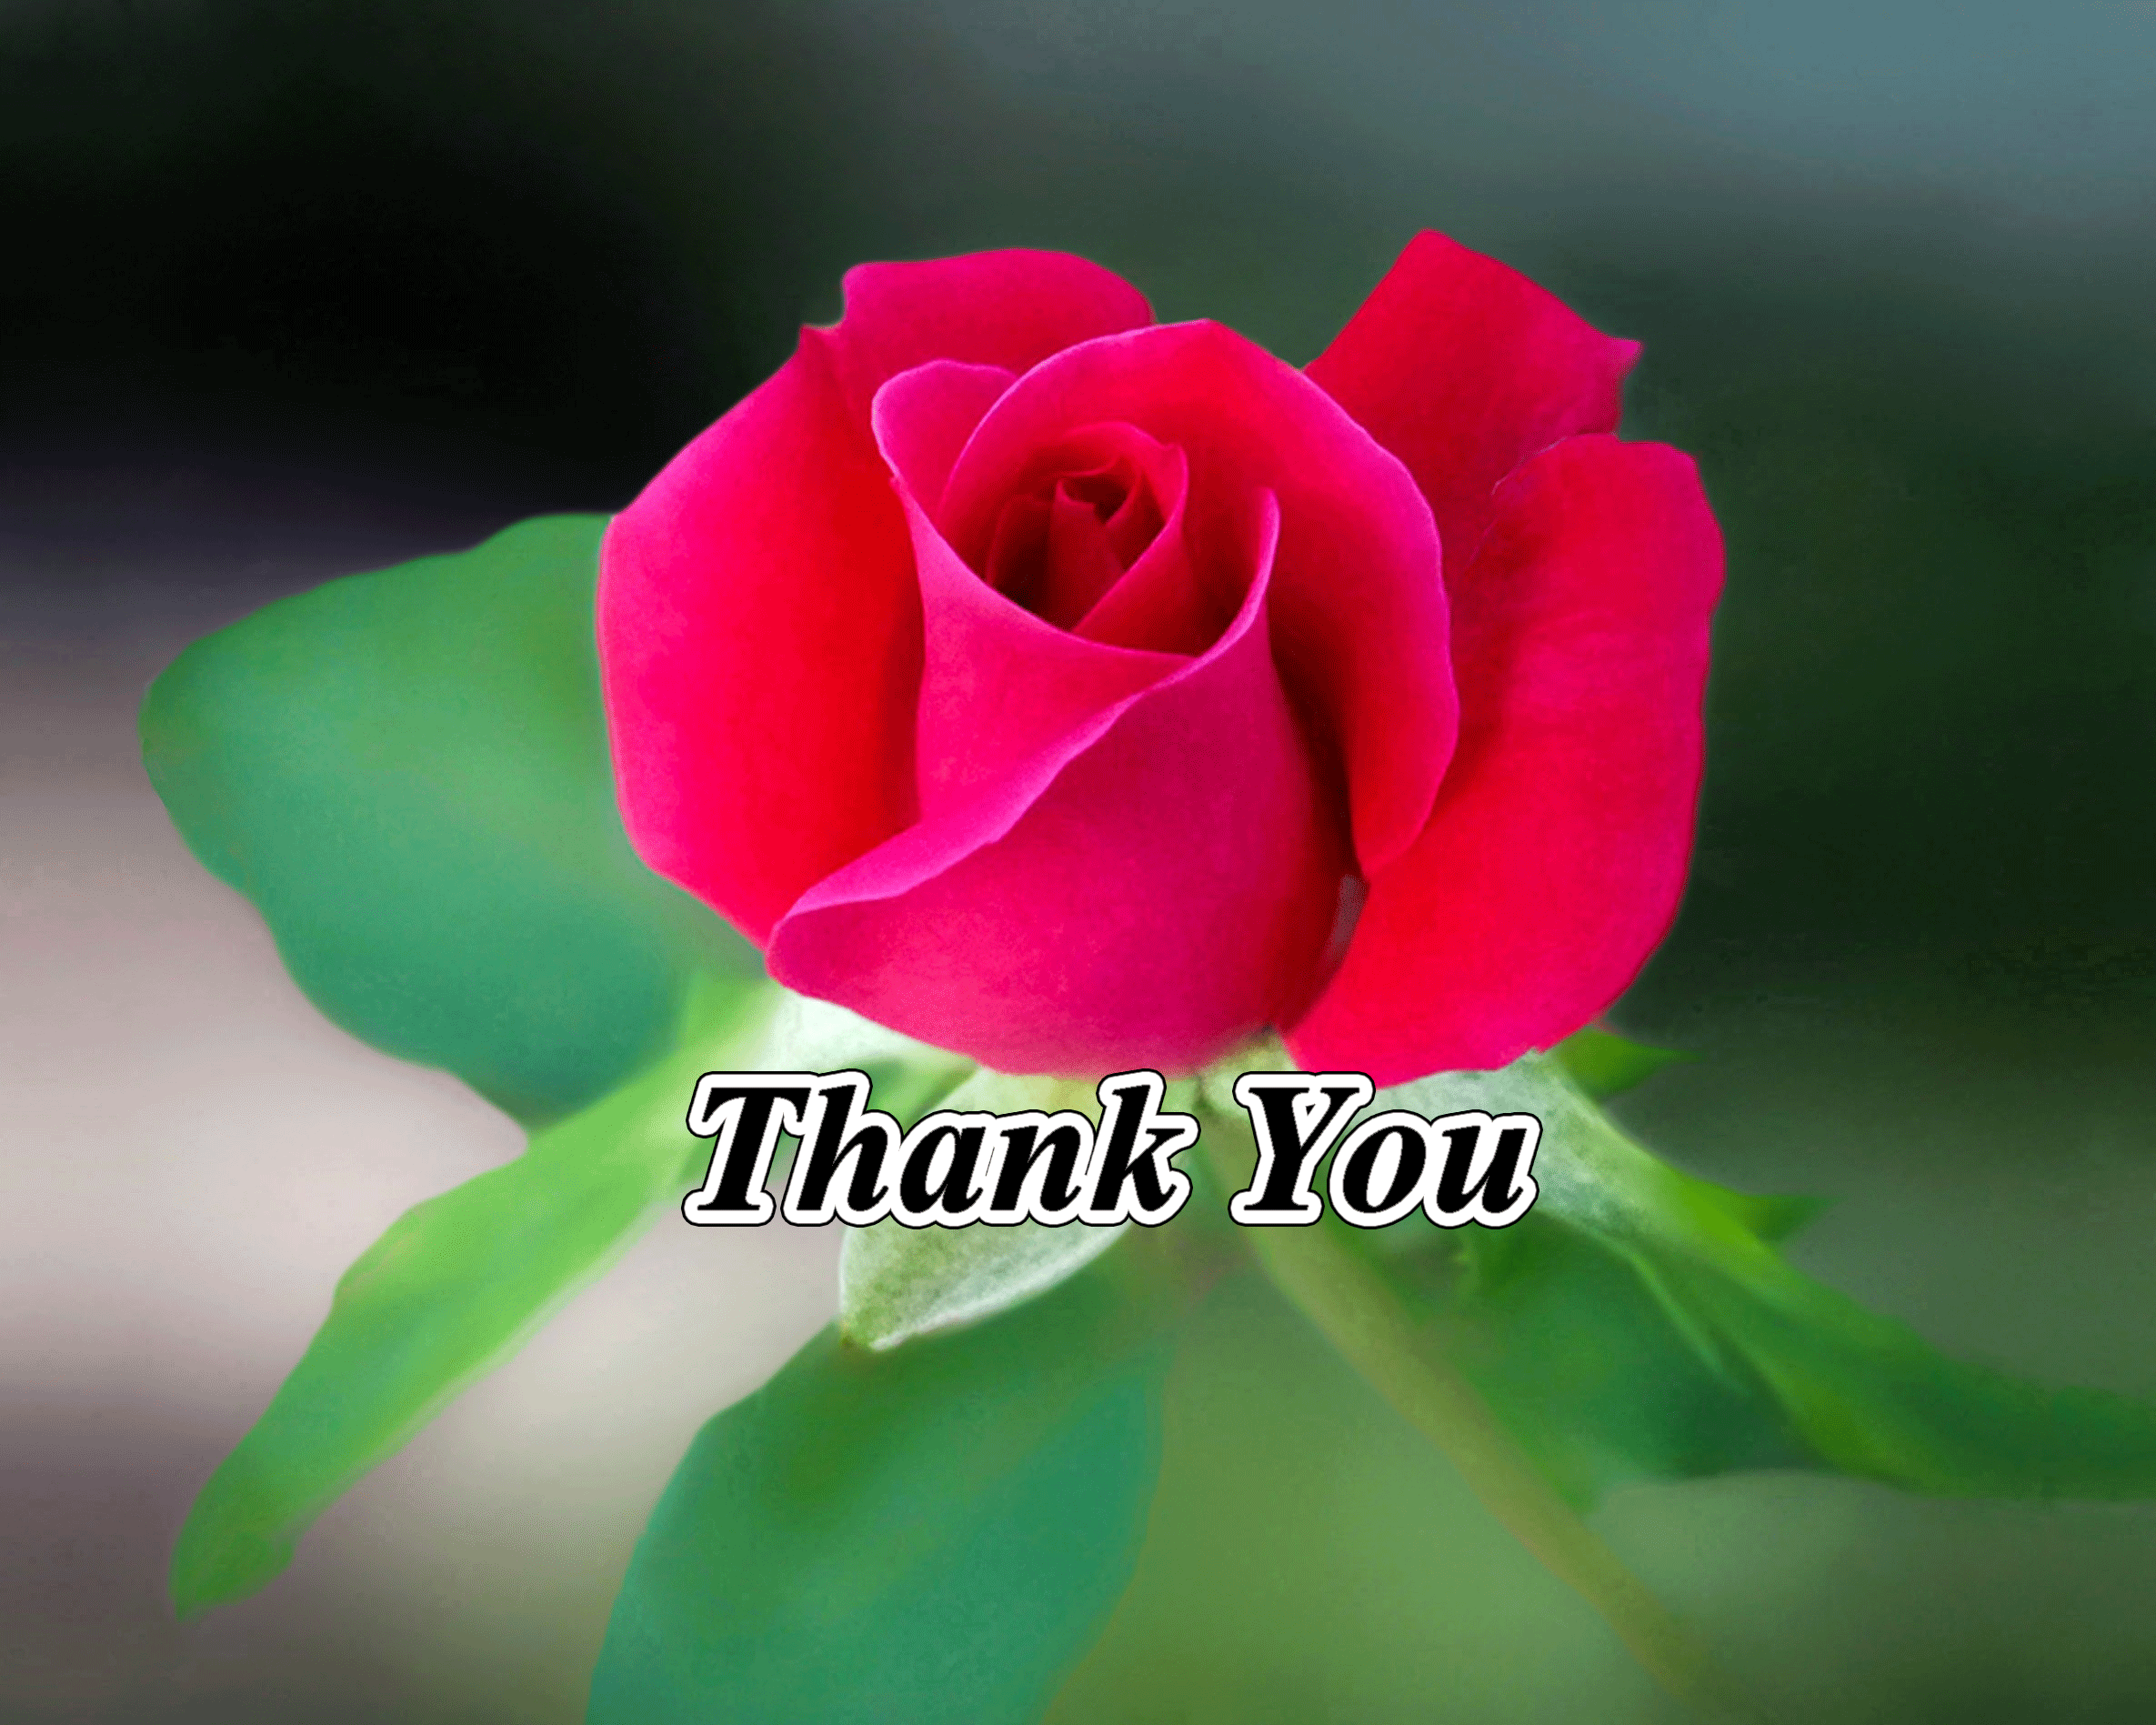 Thank you with beautiful flower image